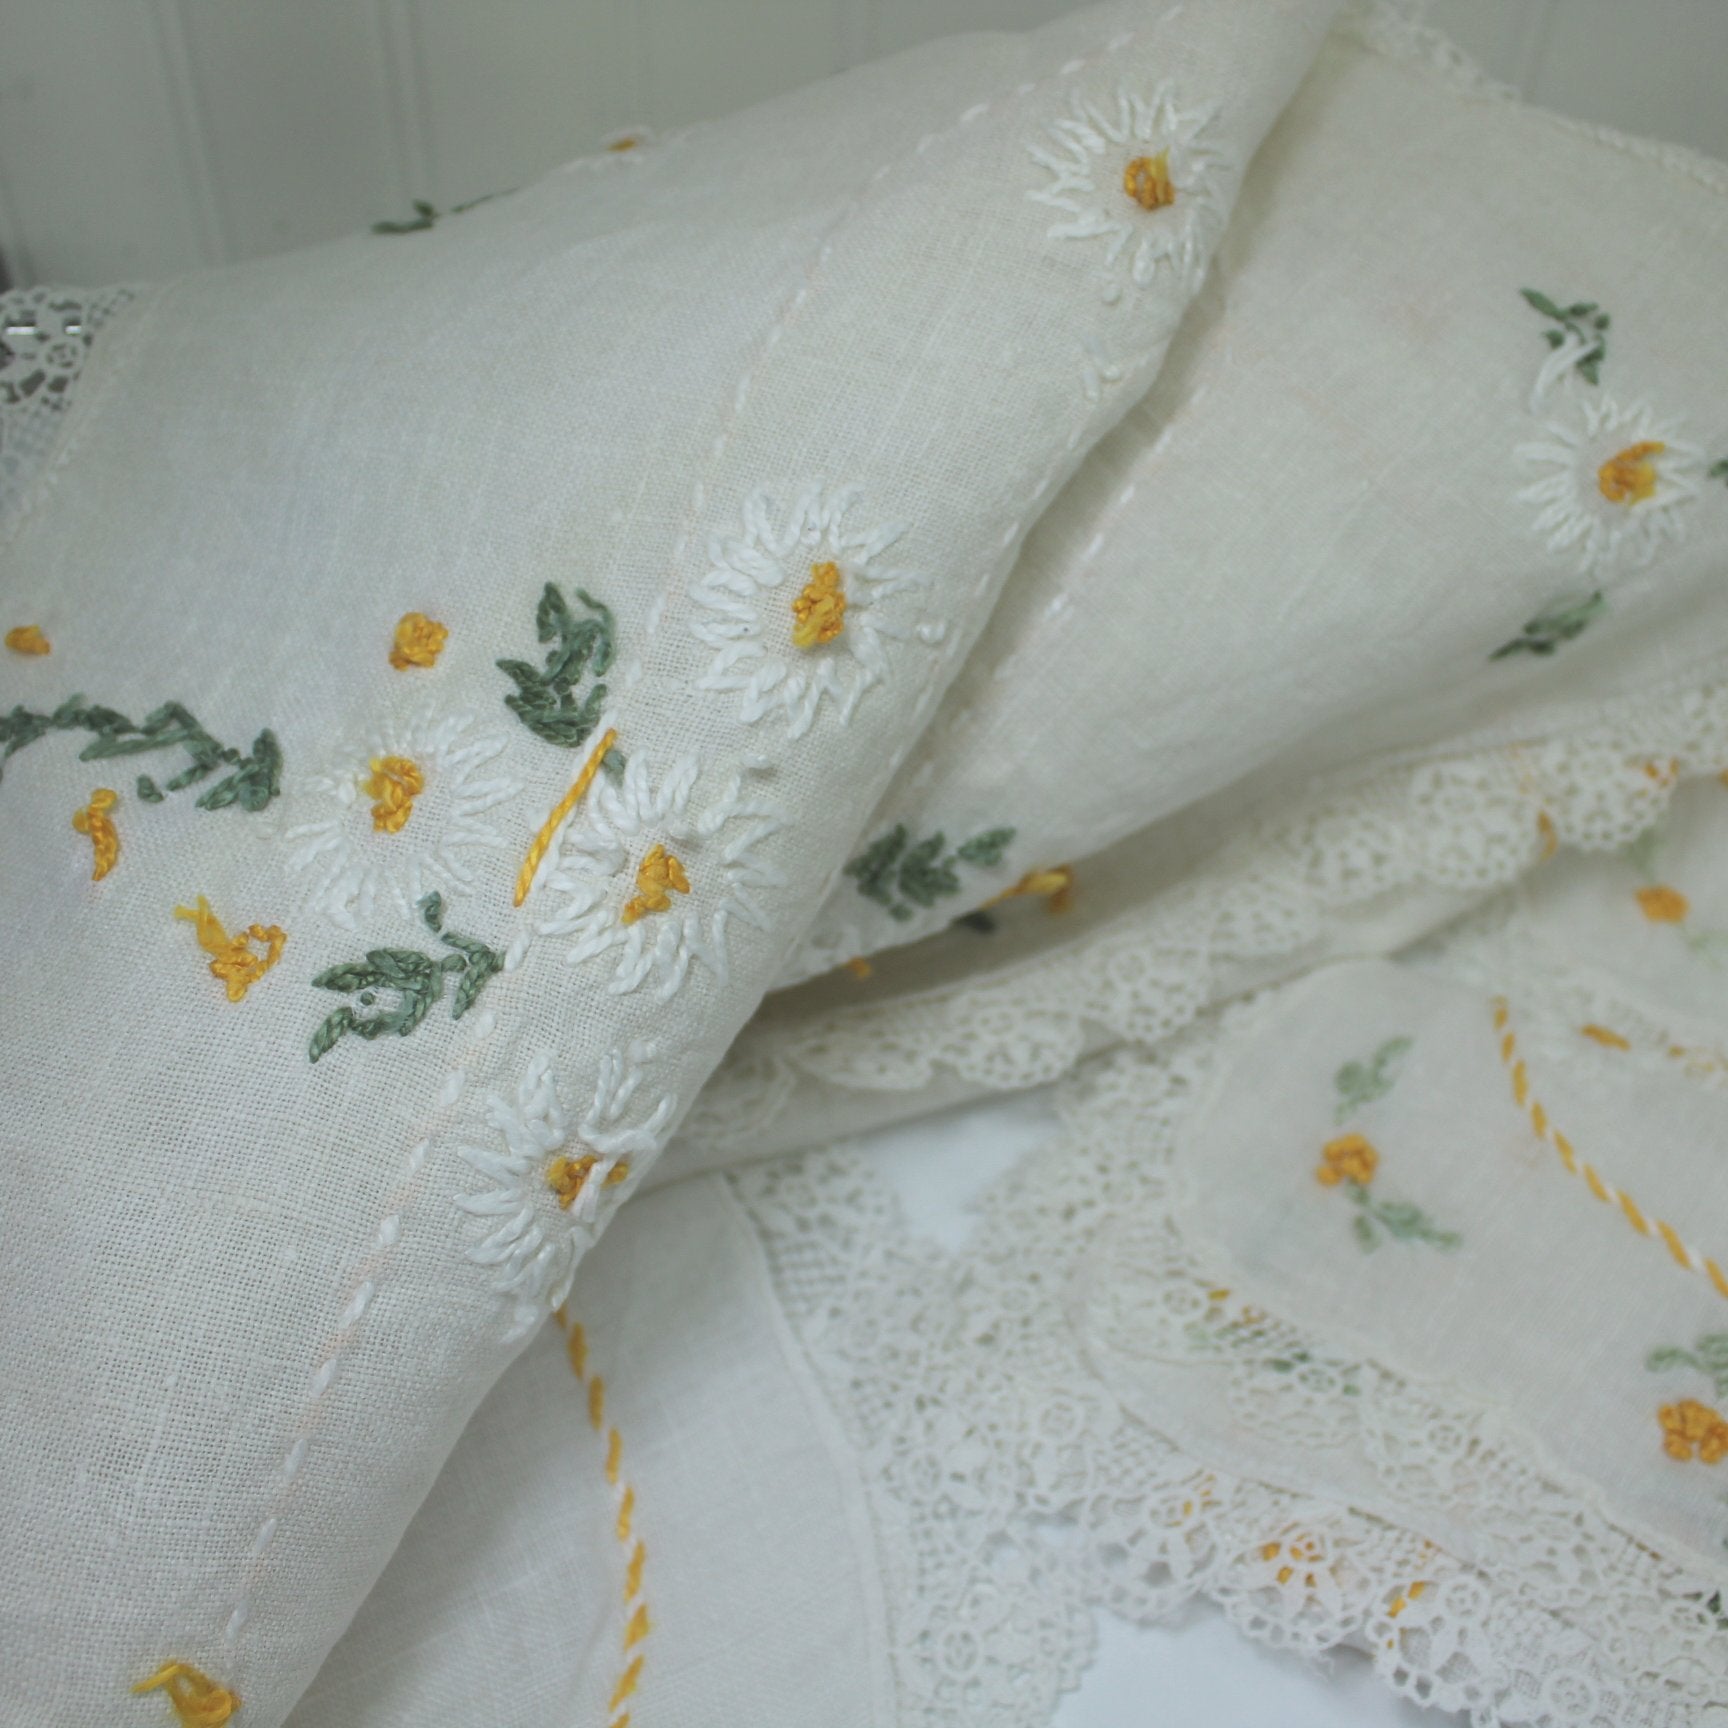 Collection 4 Embroidered Fine Linen Table Pieces White with Daisies Lace Elegant Vintage reverse of pieces showing stitching